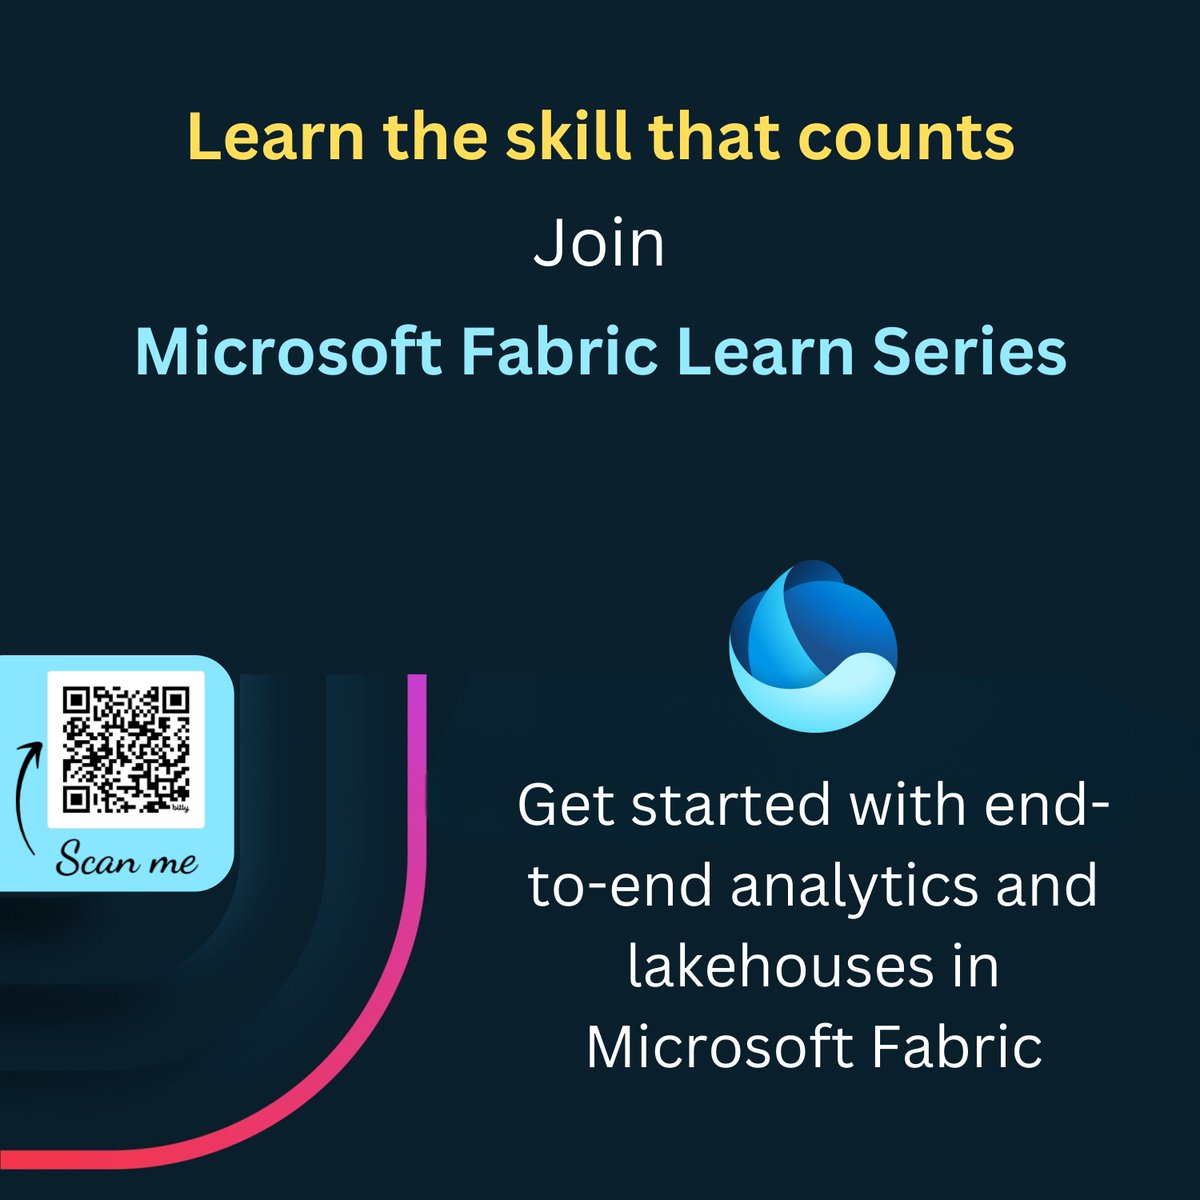 🚀😍 Season 2 of the Microsoft Fabric Learn Series is starting today. Episode 1 is all about getting started with end-to-end analytics and lakehouses in Microsoft Fabric. Join the session here: developer.microsoft.com/en-us/reactor/… #mslearn #learn #msfabric #microsoftfabric